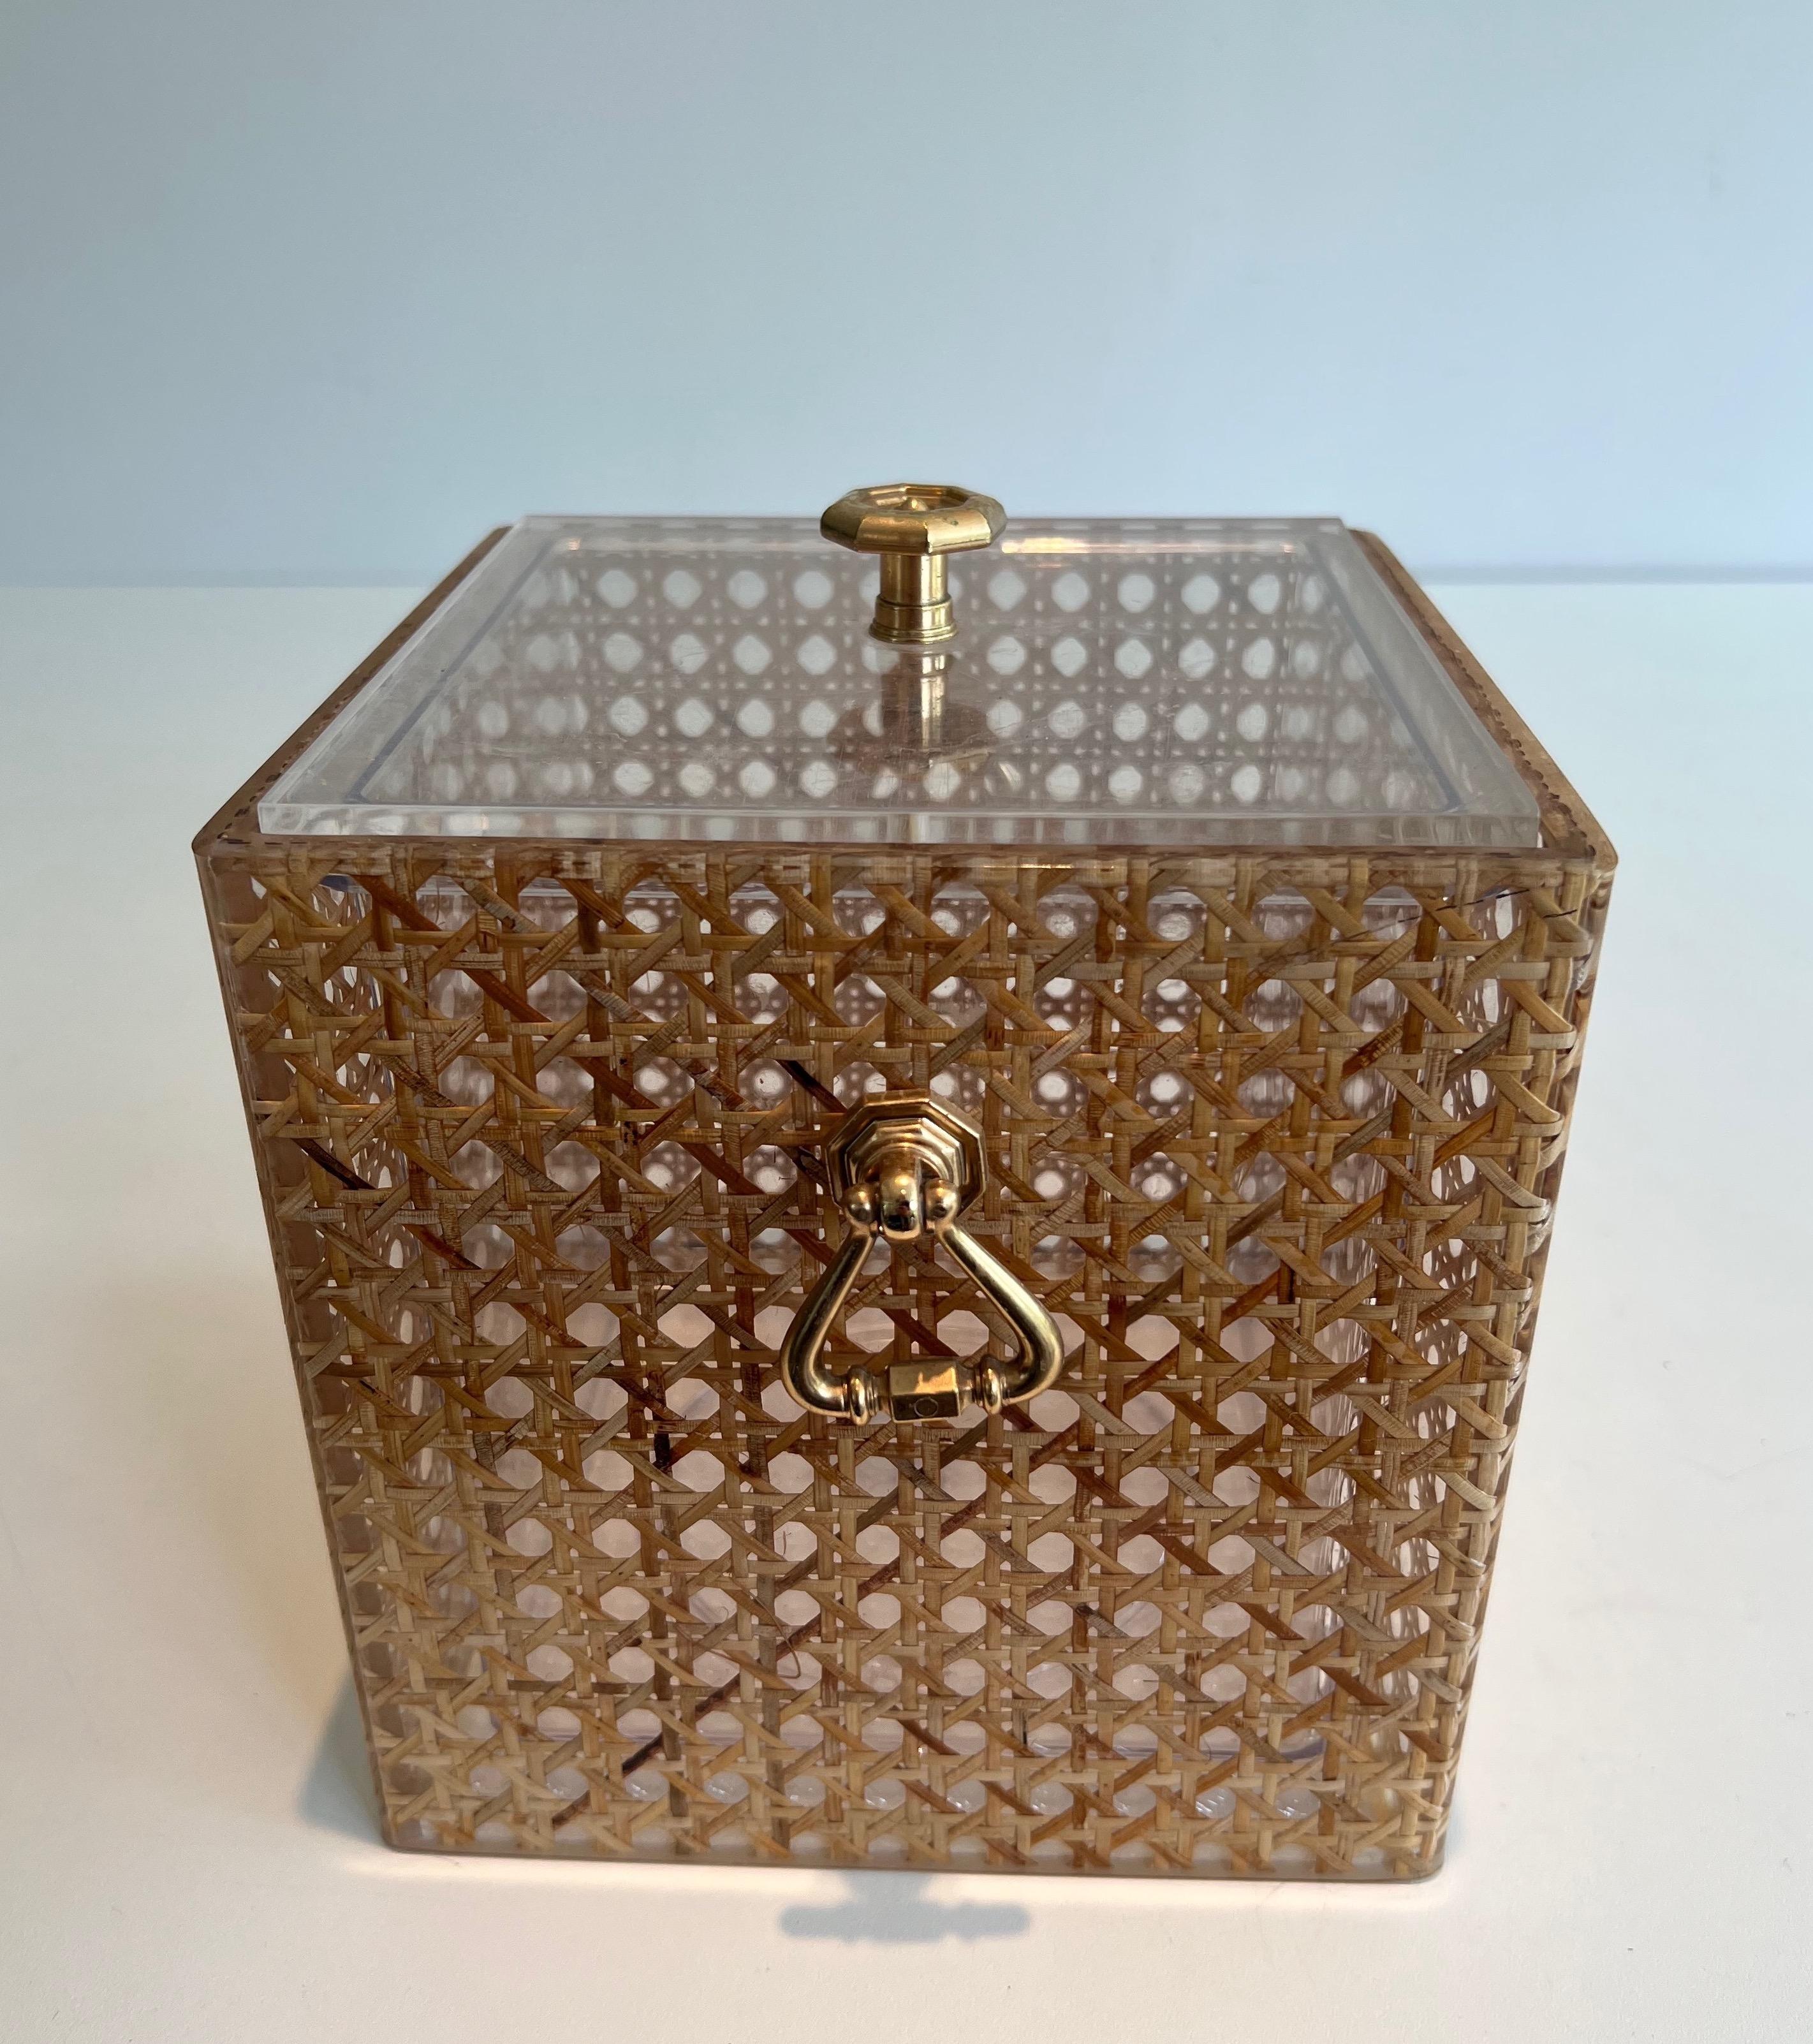 This very nice and elegant ice bucket is made of lucite with cane incrusted in lucite and brass. This is an Italian work in the style of Christian Dior. Circa 1970